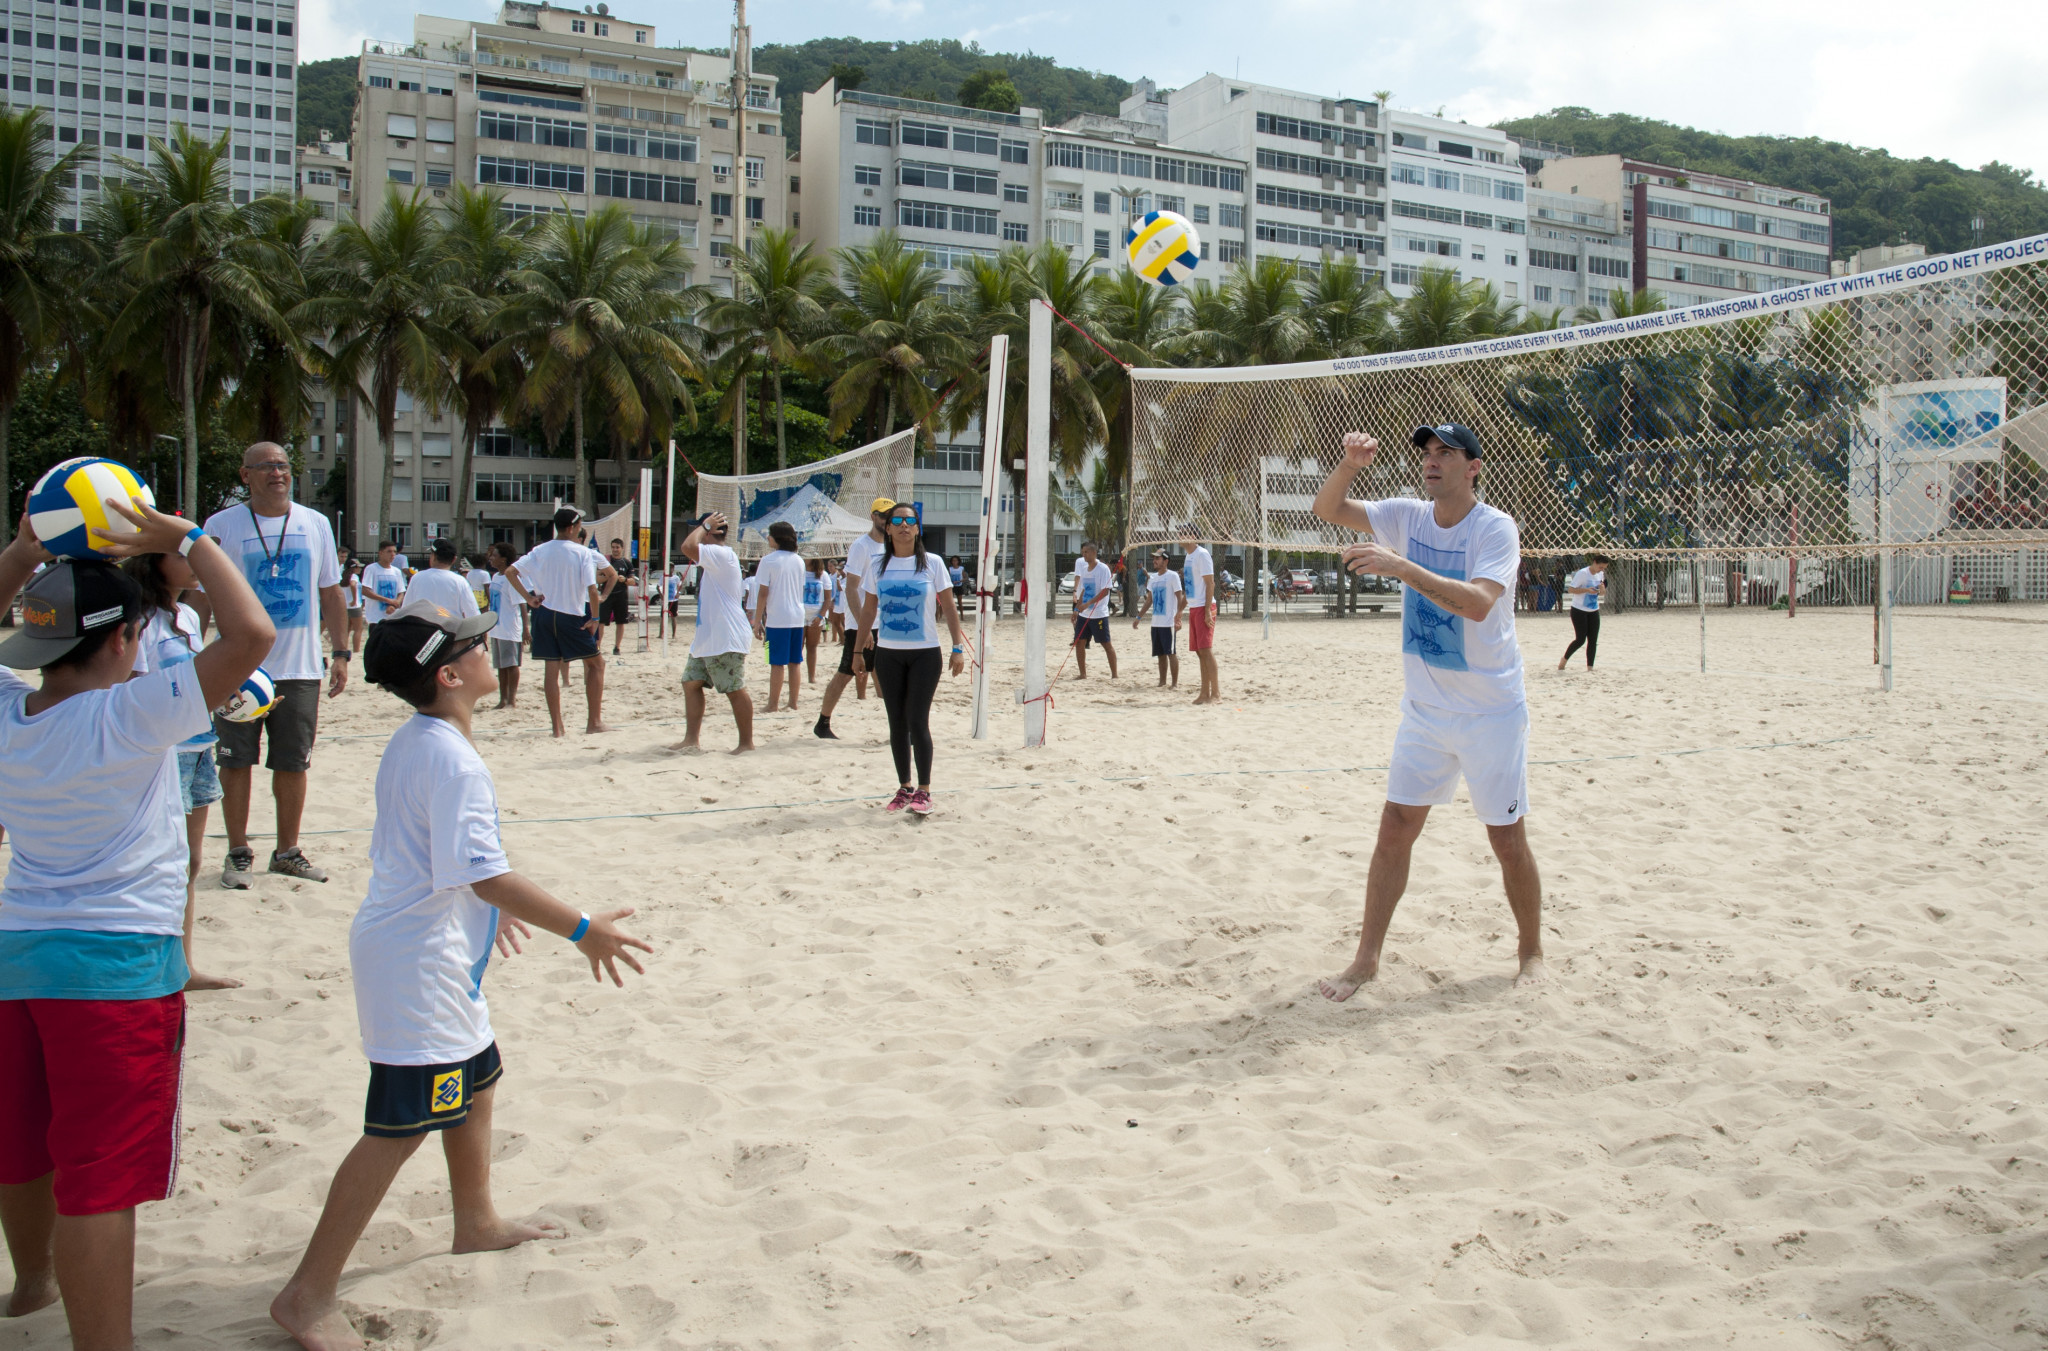 Brazilian volleyball star Giba attended the Good Net launch ©FIVB